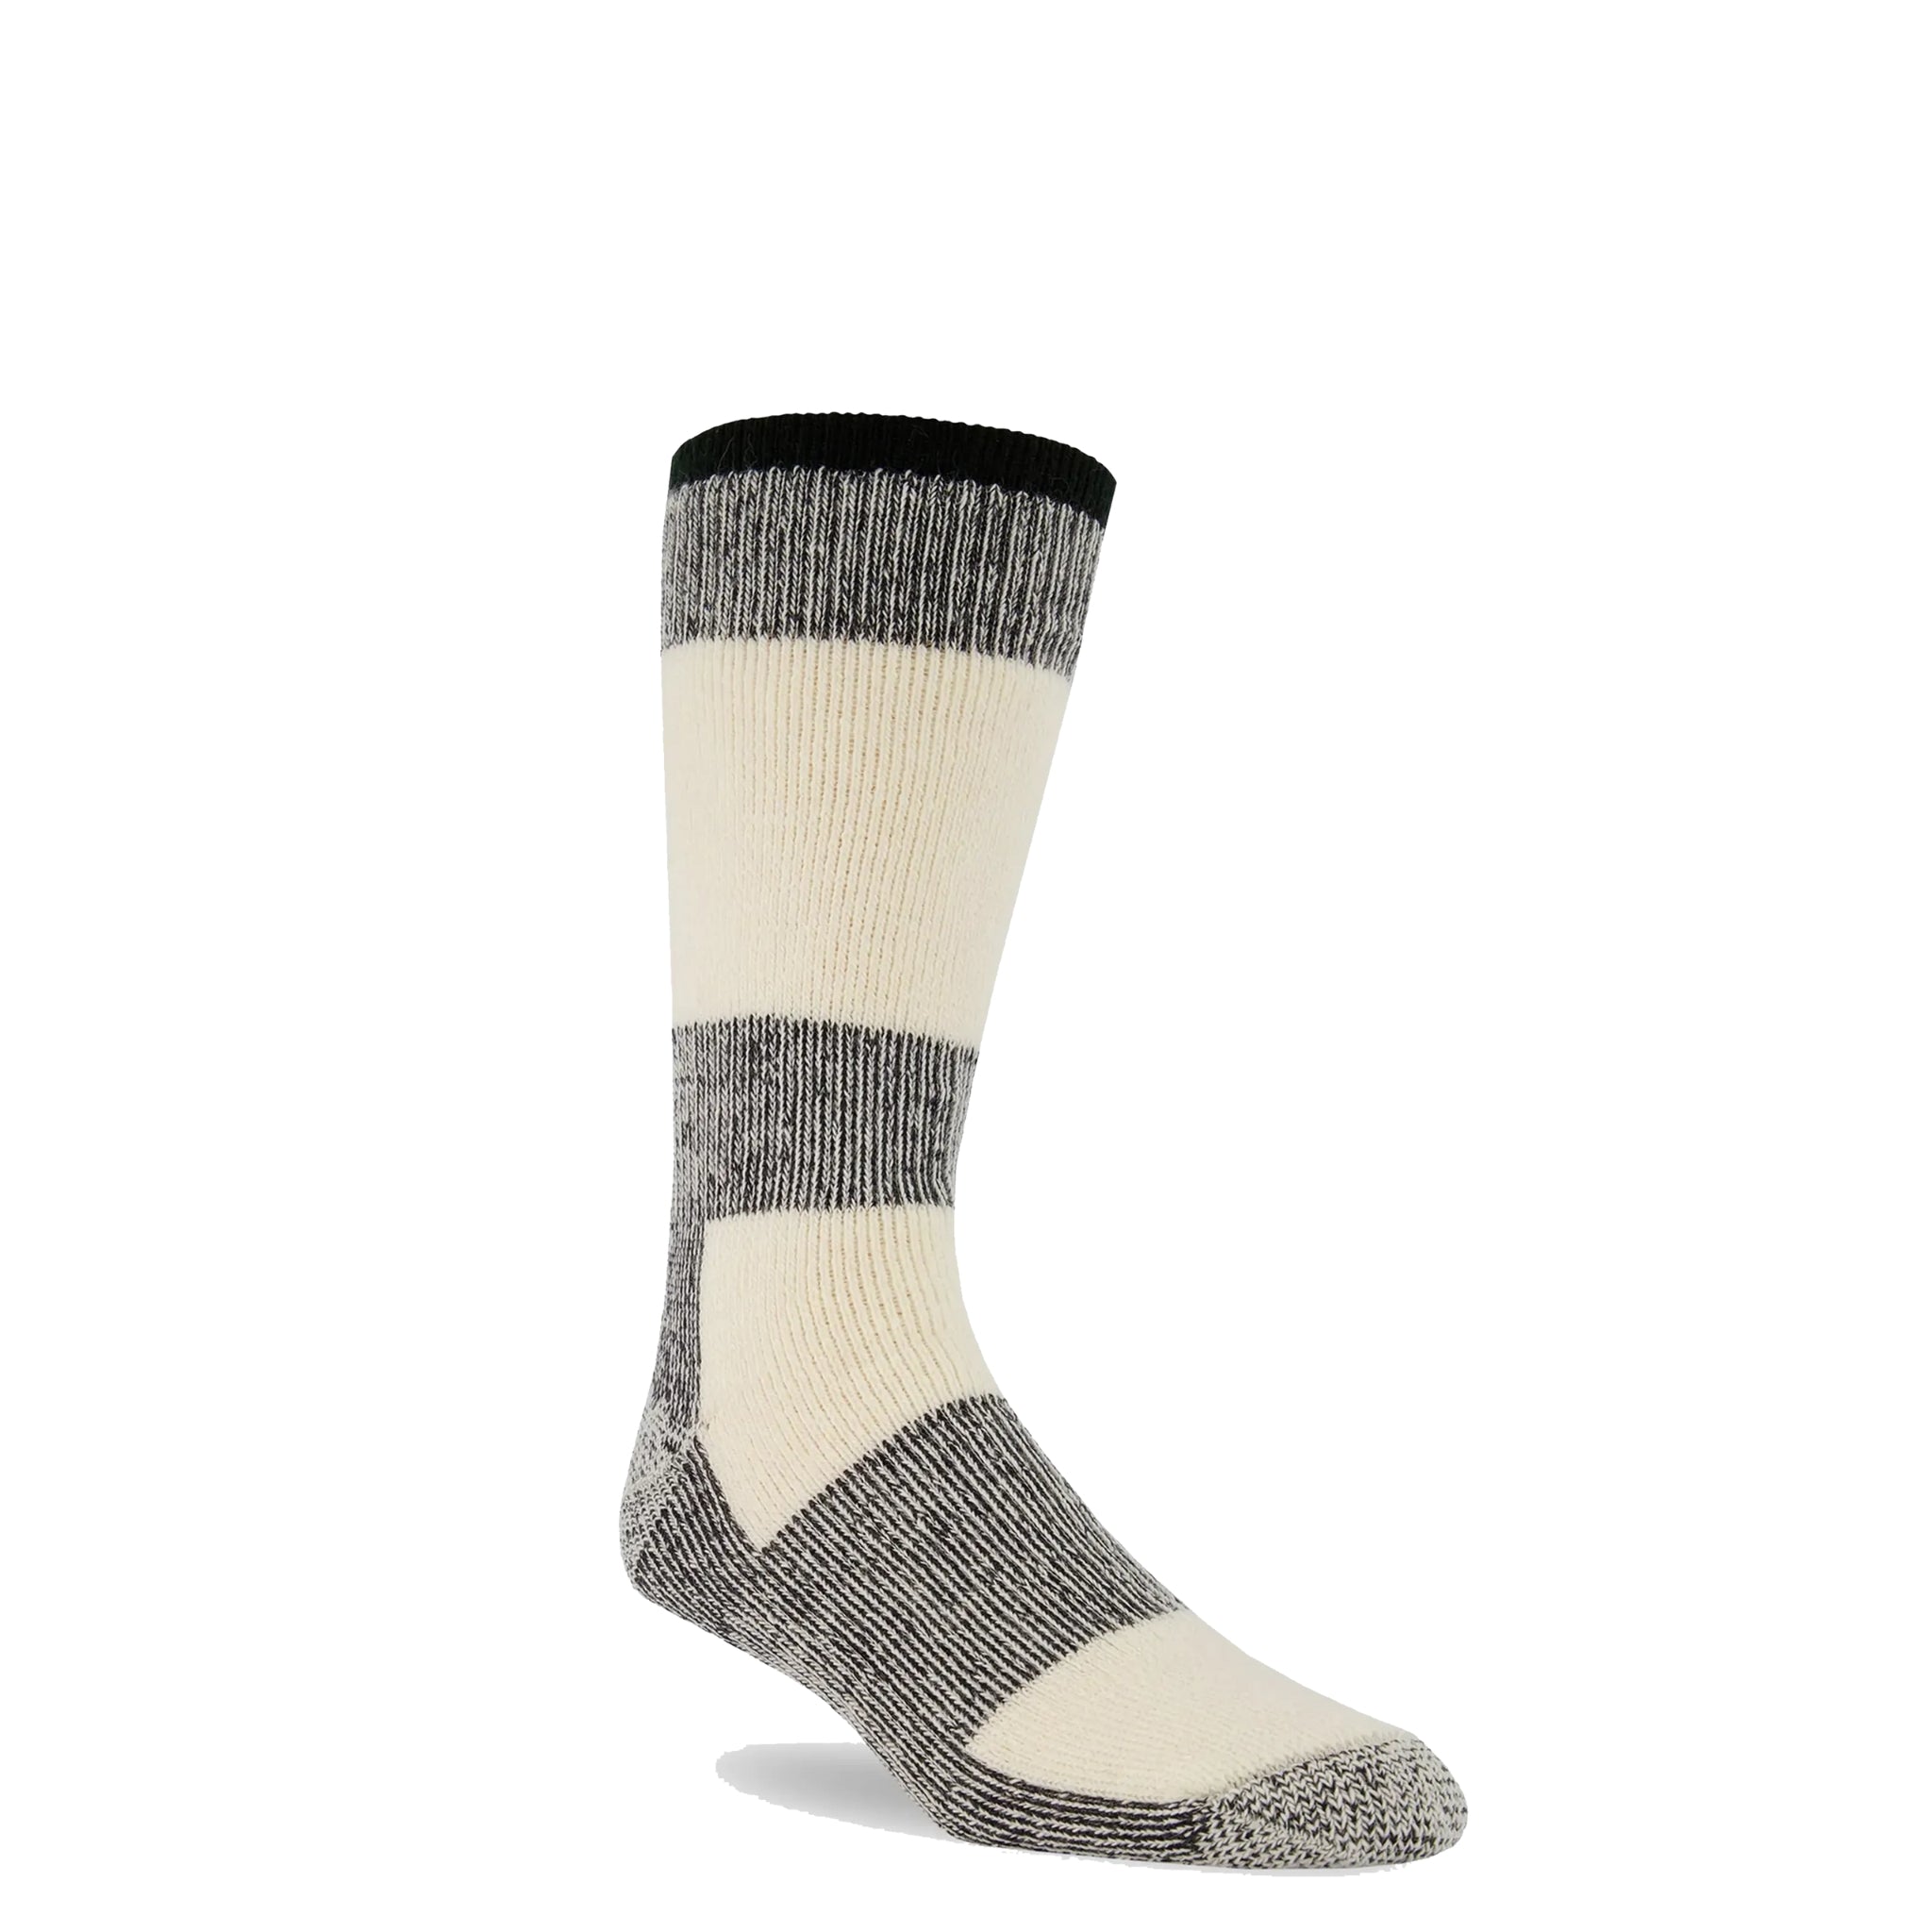 one natural heavyweight sock standing on its own on a white background